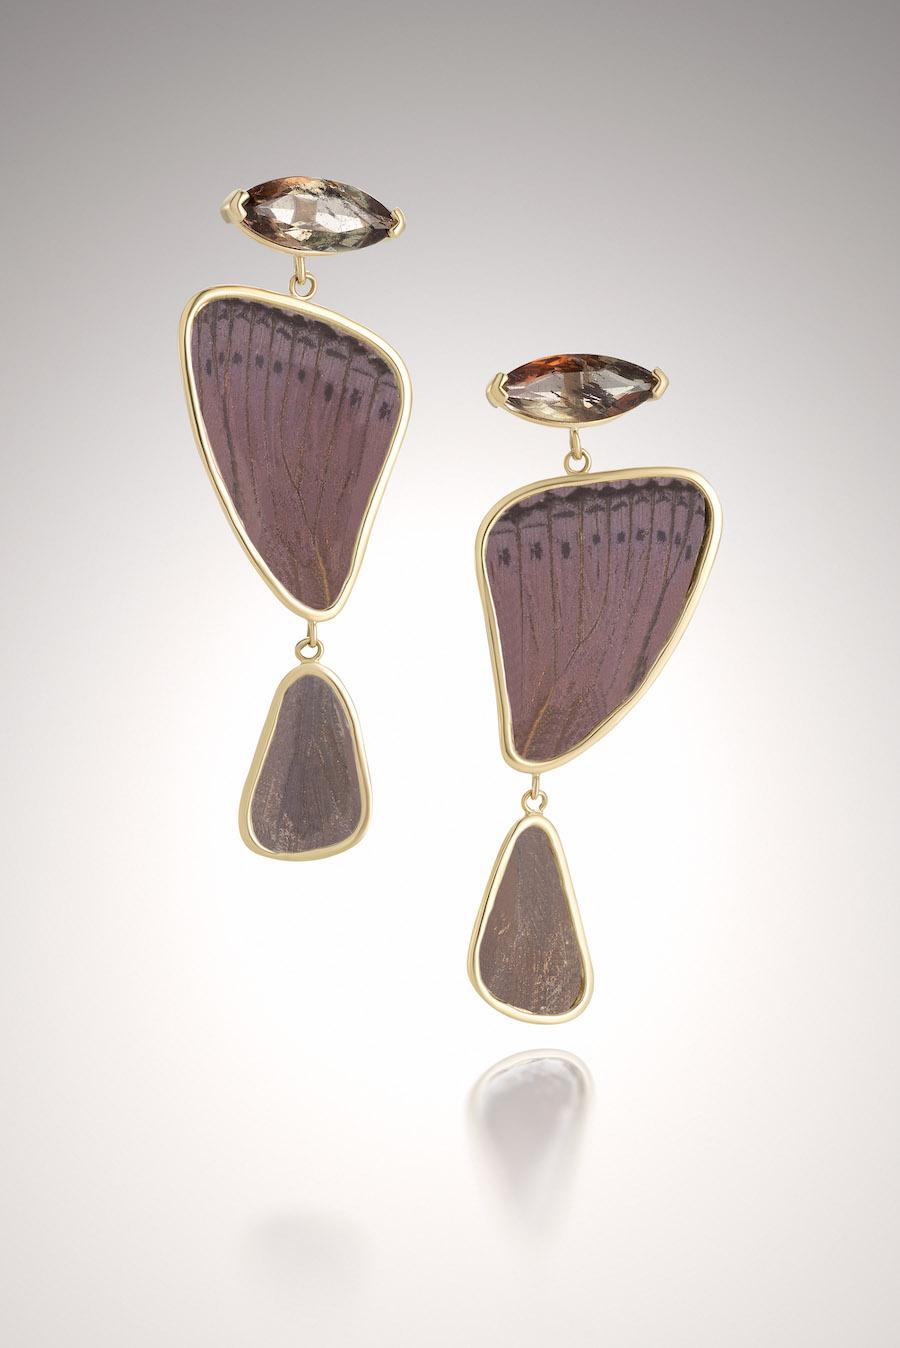 10K, Purple Butterfly wings protected by a layer of sheet Mica with marquee cut Andalusite's (3.05 CTW) are uniquely one-of-a-kind pair of earrings.  The purple brownish color of the color changing Andalusite's play off the purple butterfly wings. 